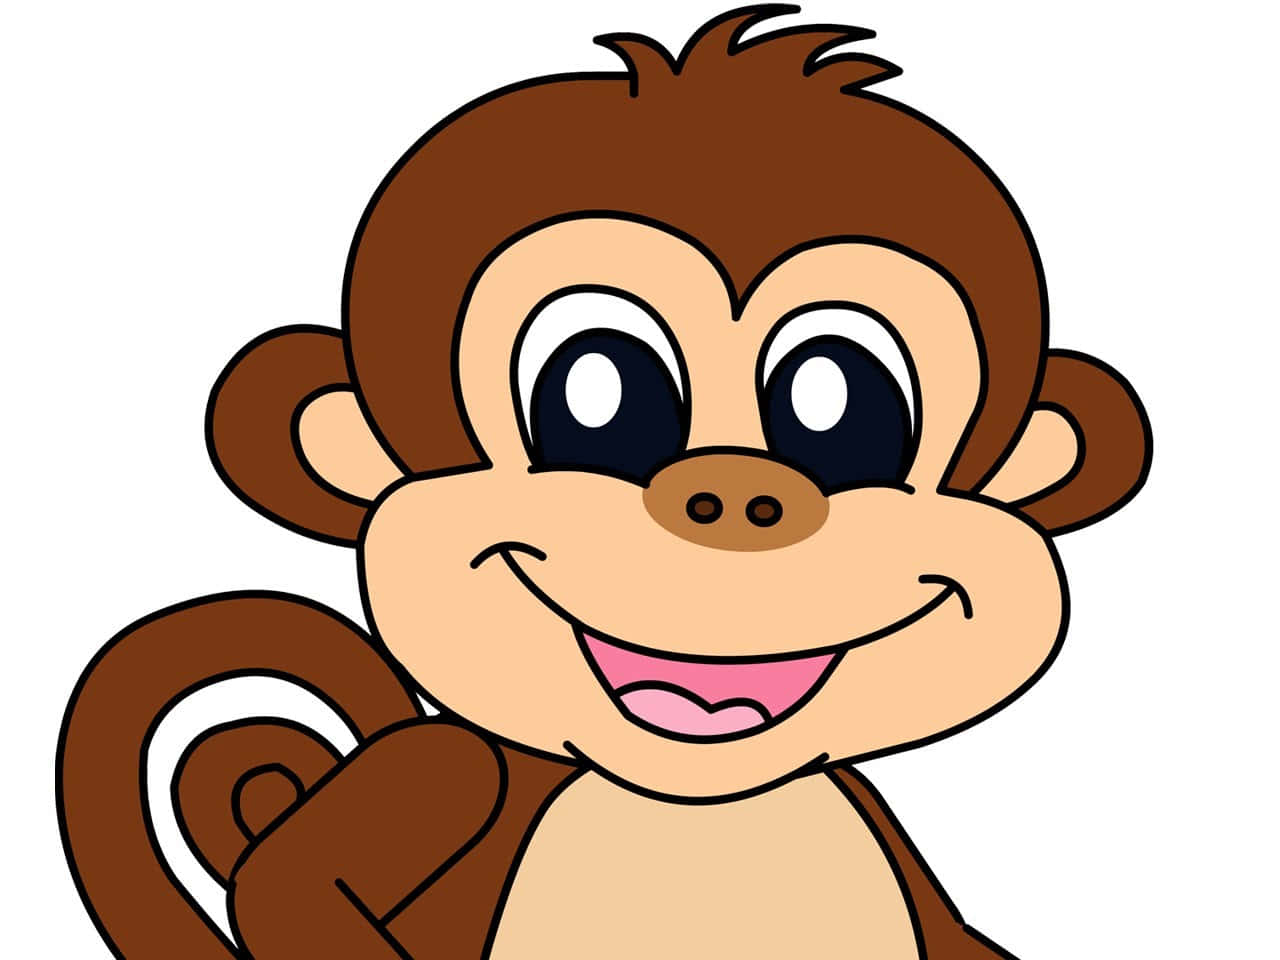 This cartoon monkey is living its best life!